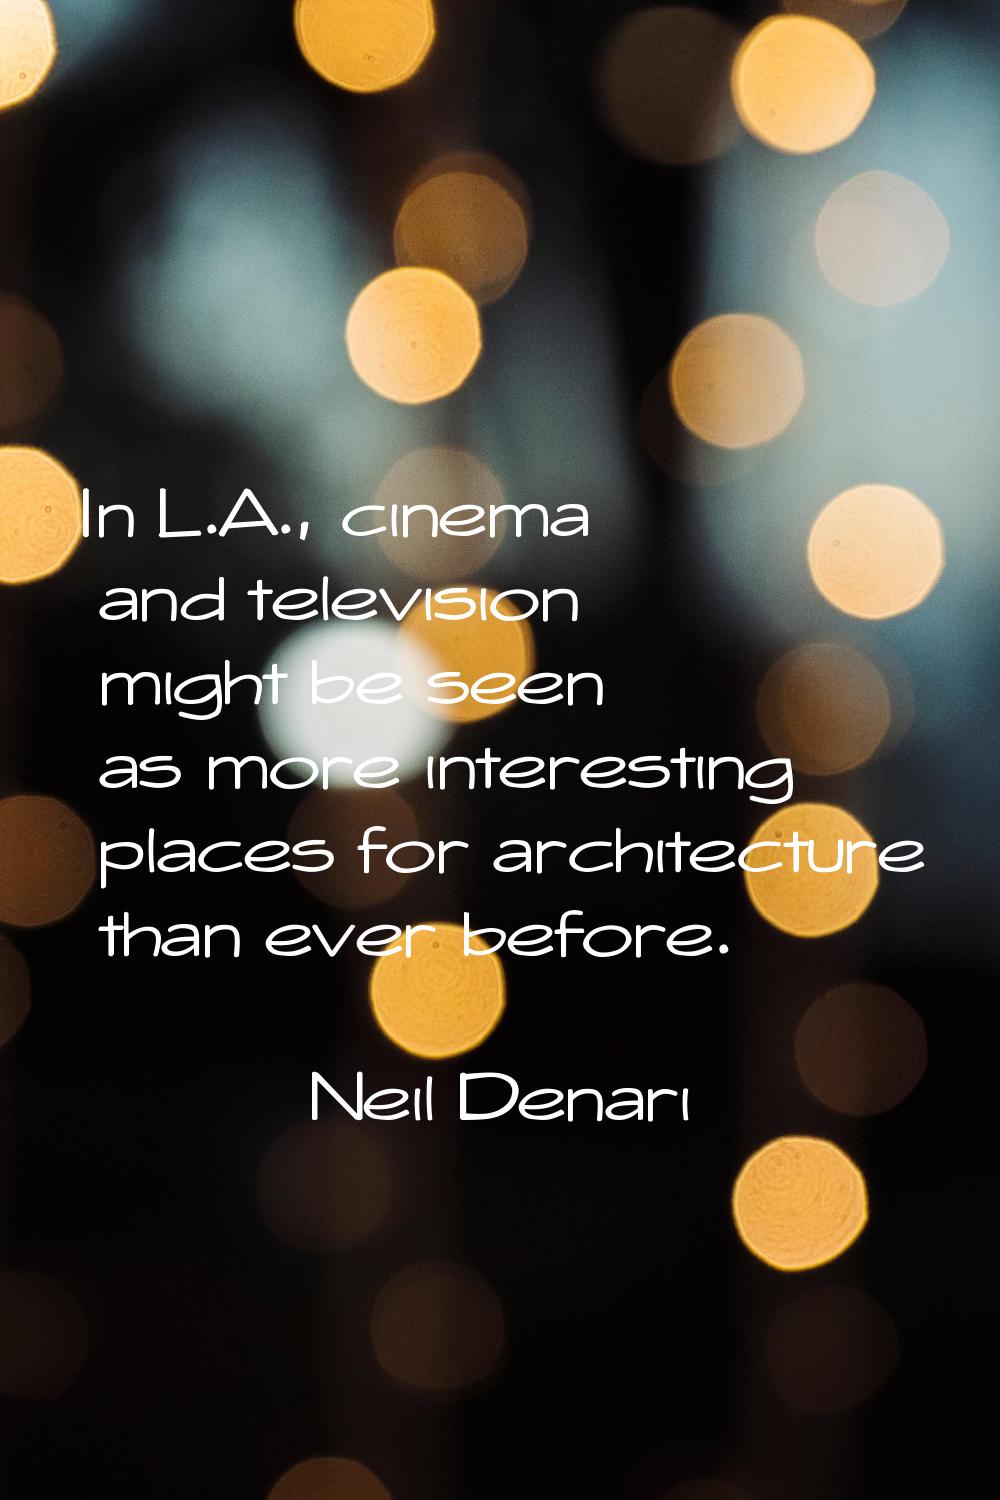 In L.A., cinema and television might be seen as more interesting places for architecture than ever 